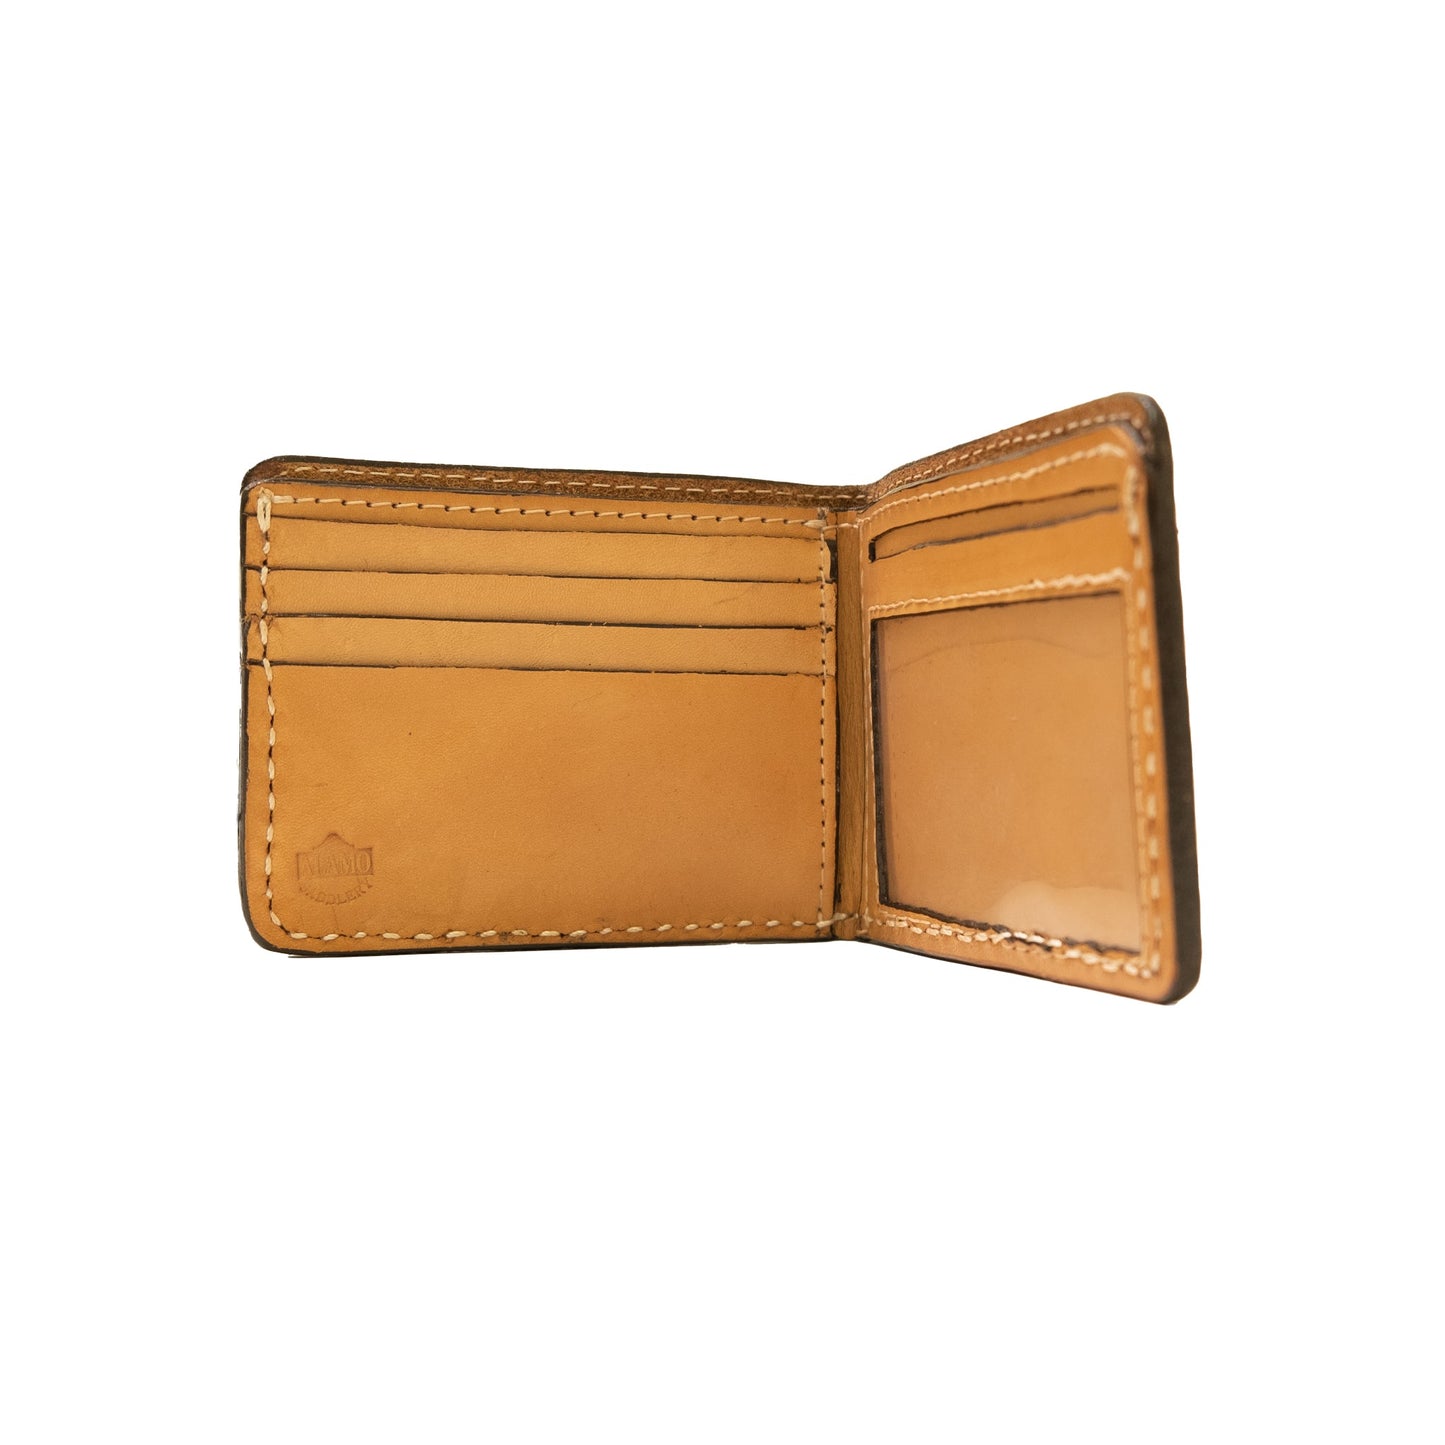 Bi-fold wallet golden leather poco oak tooling with background paint